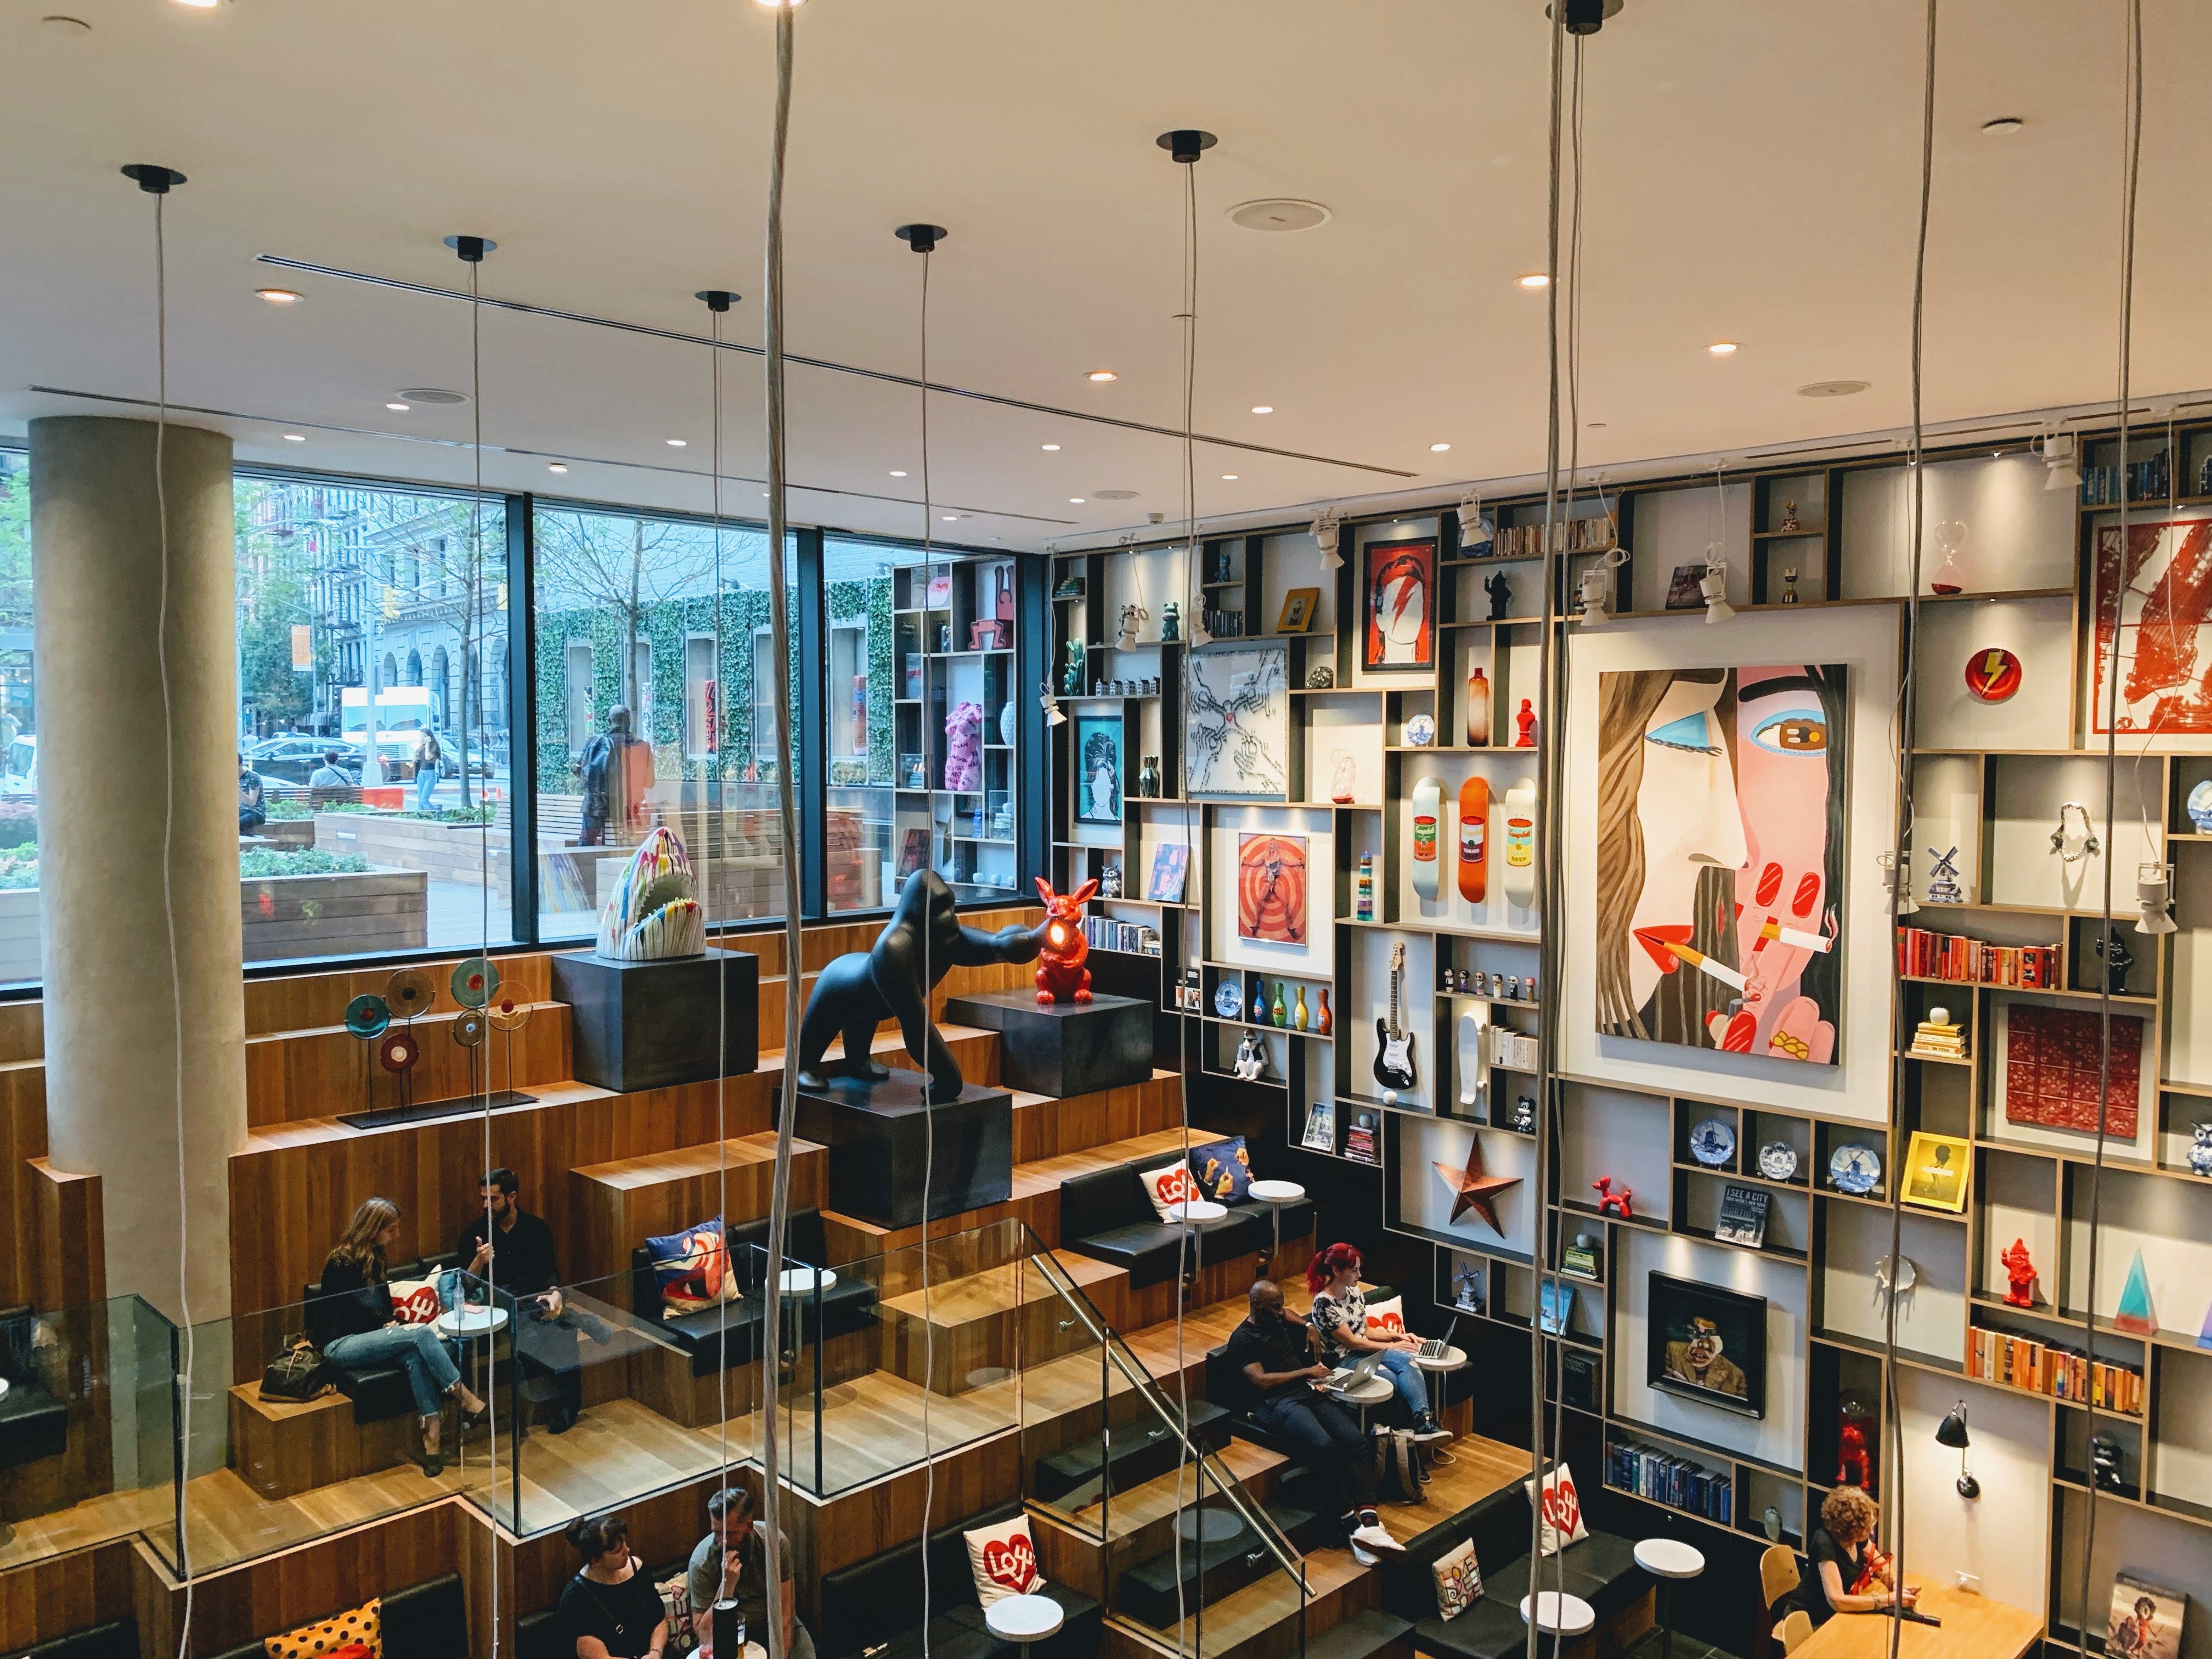 CitizenM just launched a loyalty program that's breaking all the rules